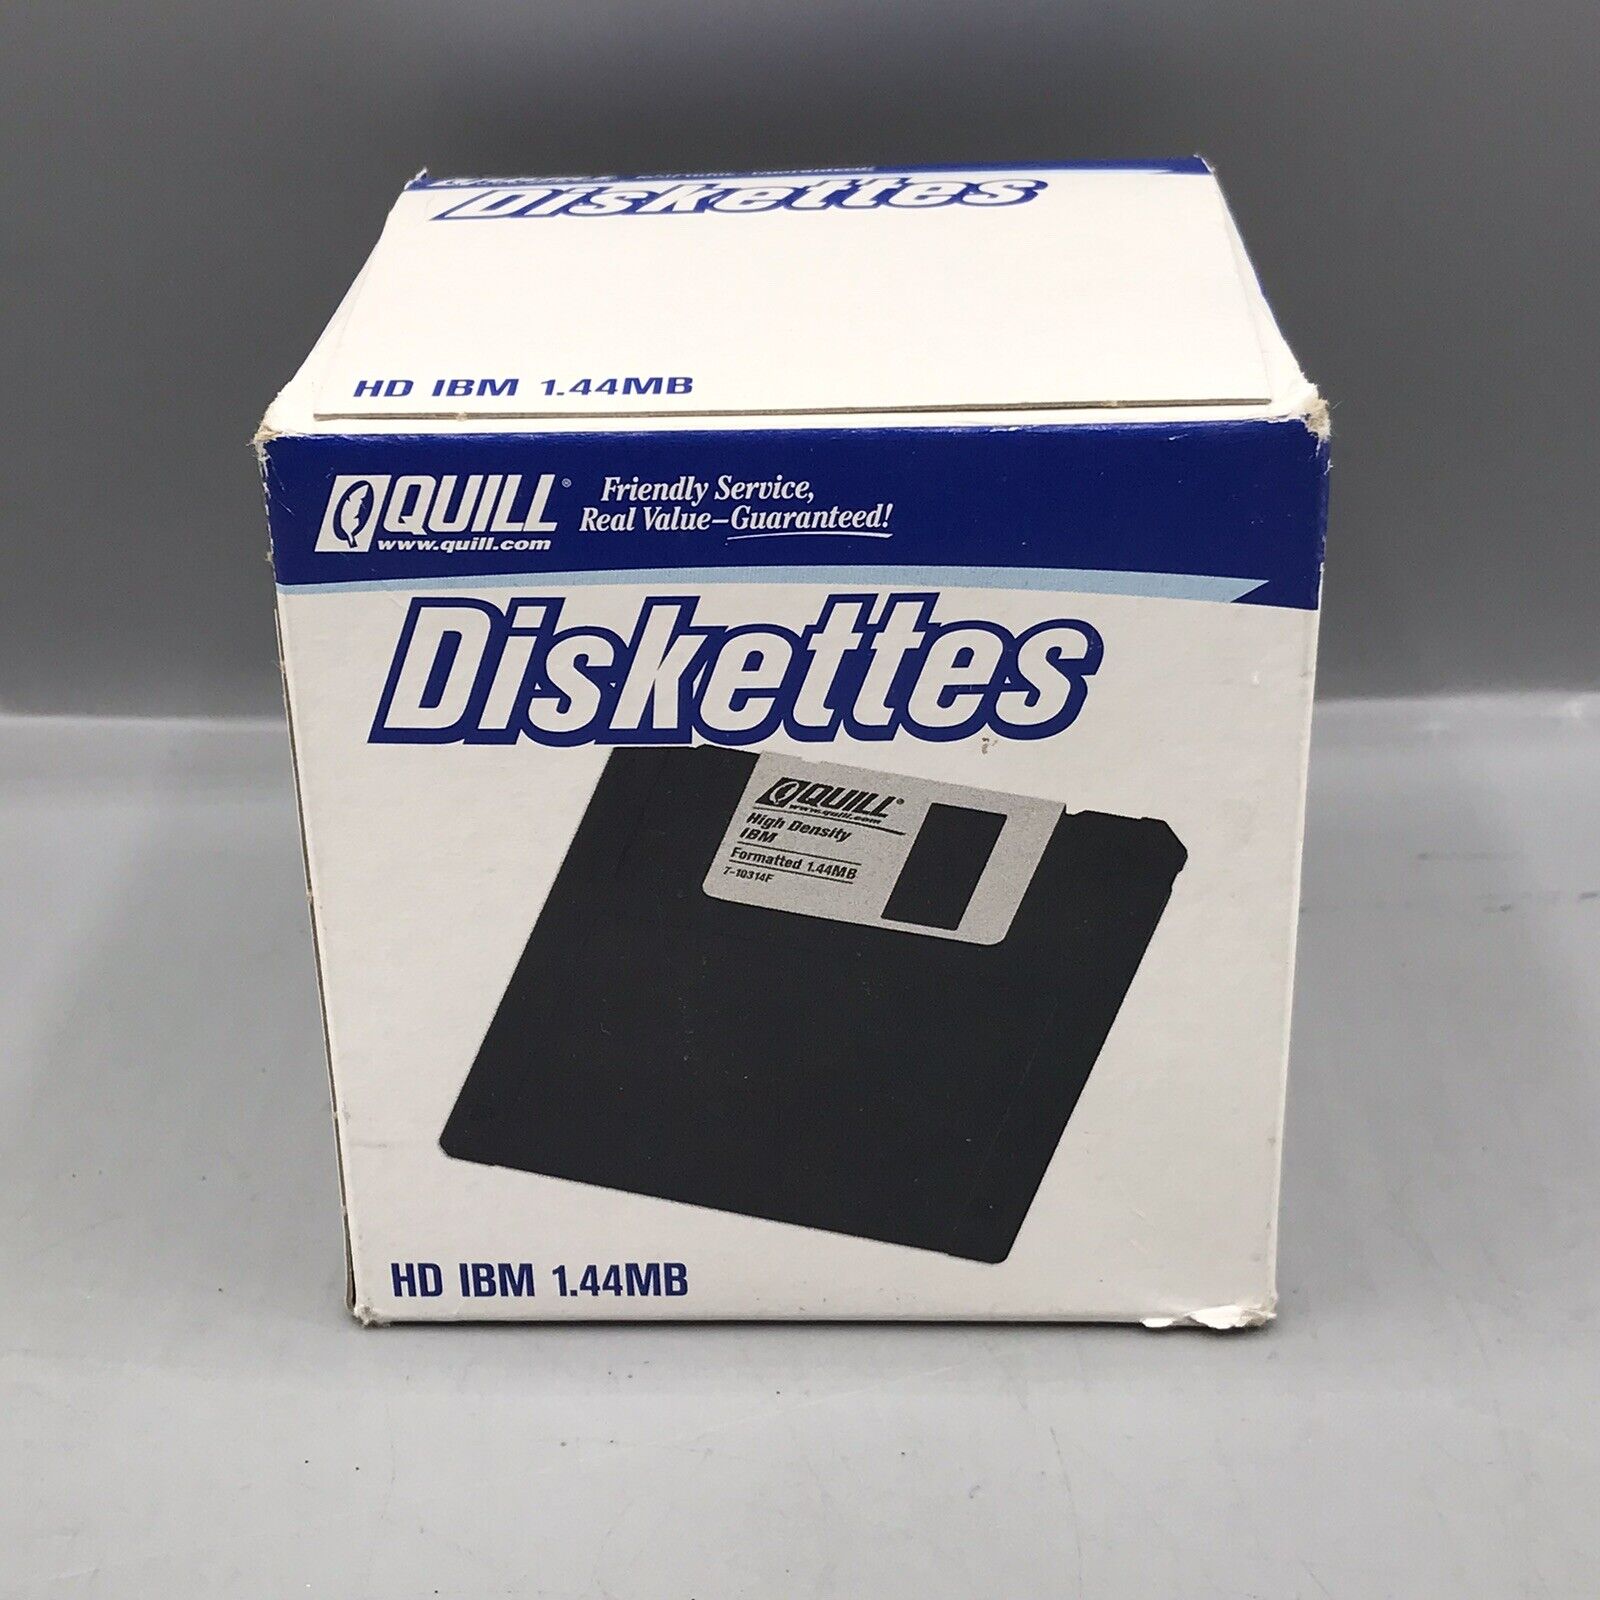 Quill Diskettes HD IBM 1.44 MB Lot Of 25 Formatted Brand New Sealed Floppy VTG